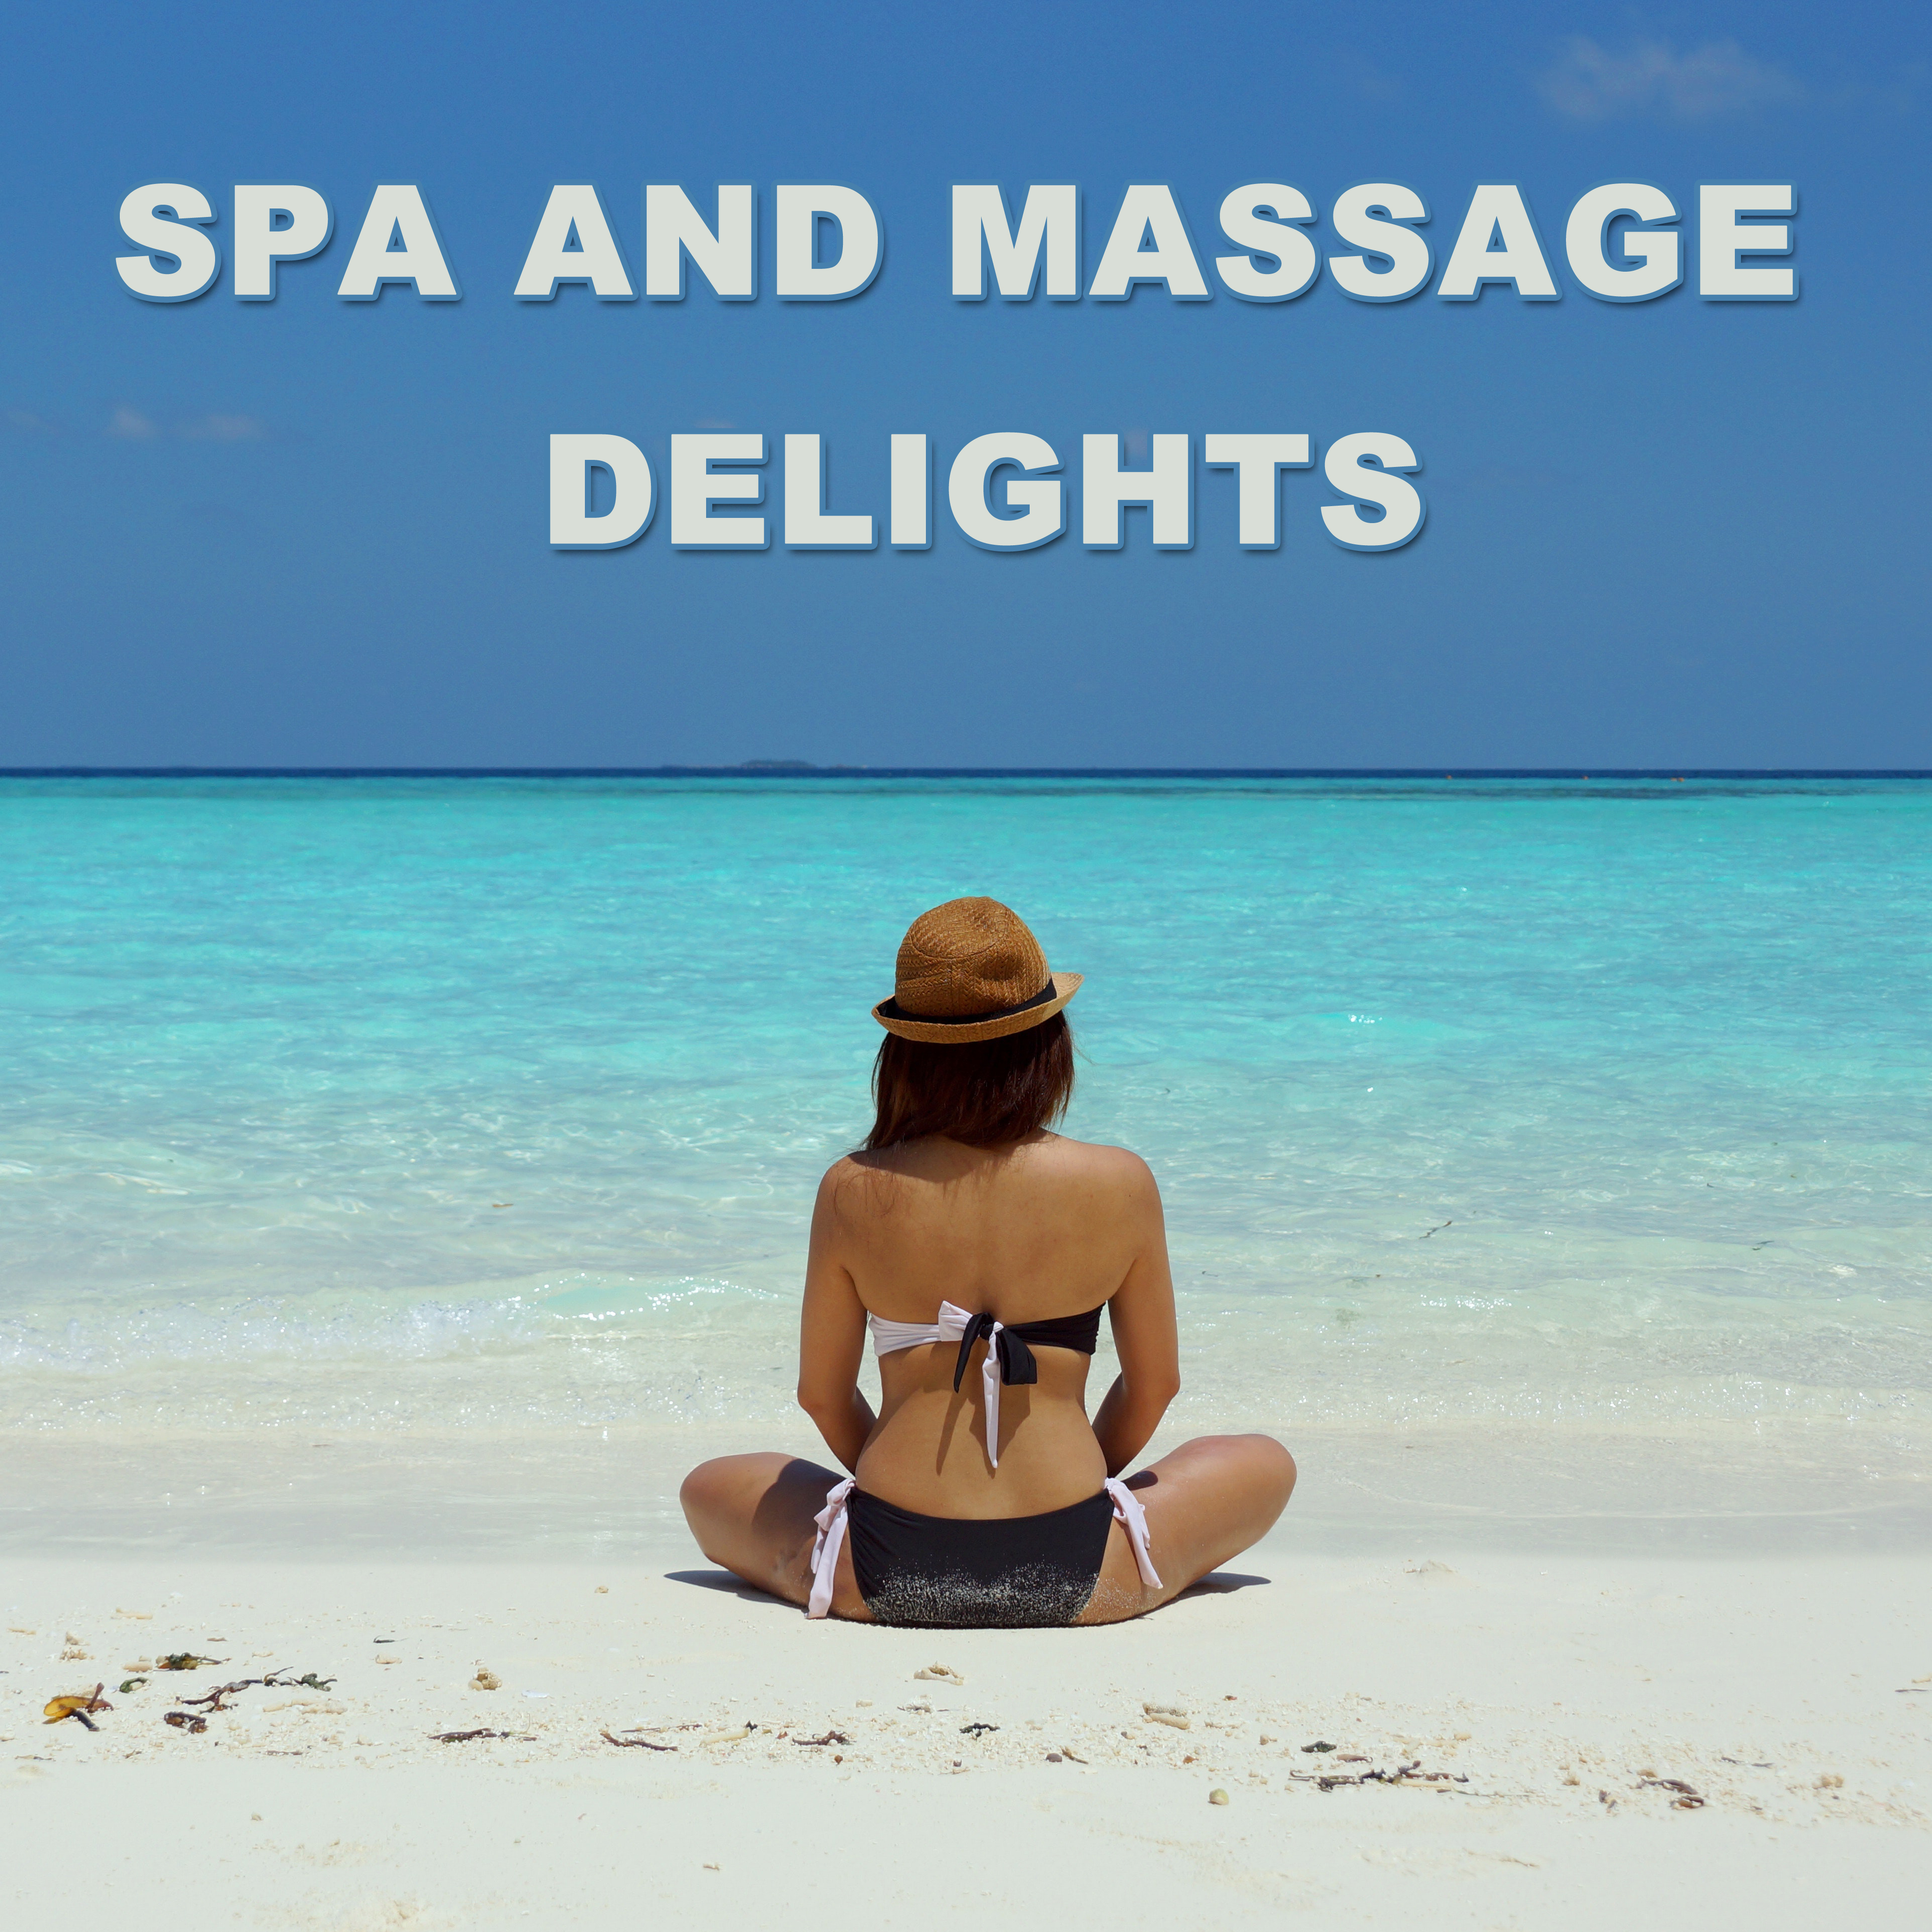 15 Spa and Massage Delights